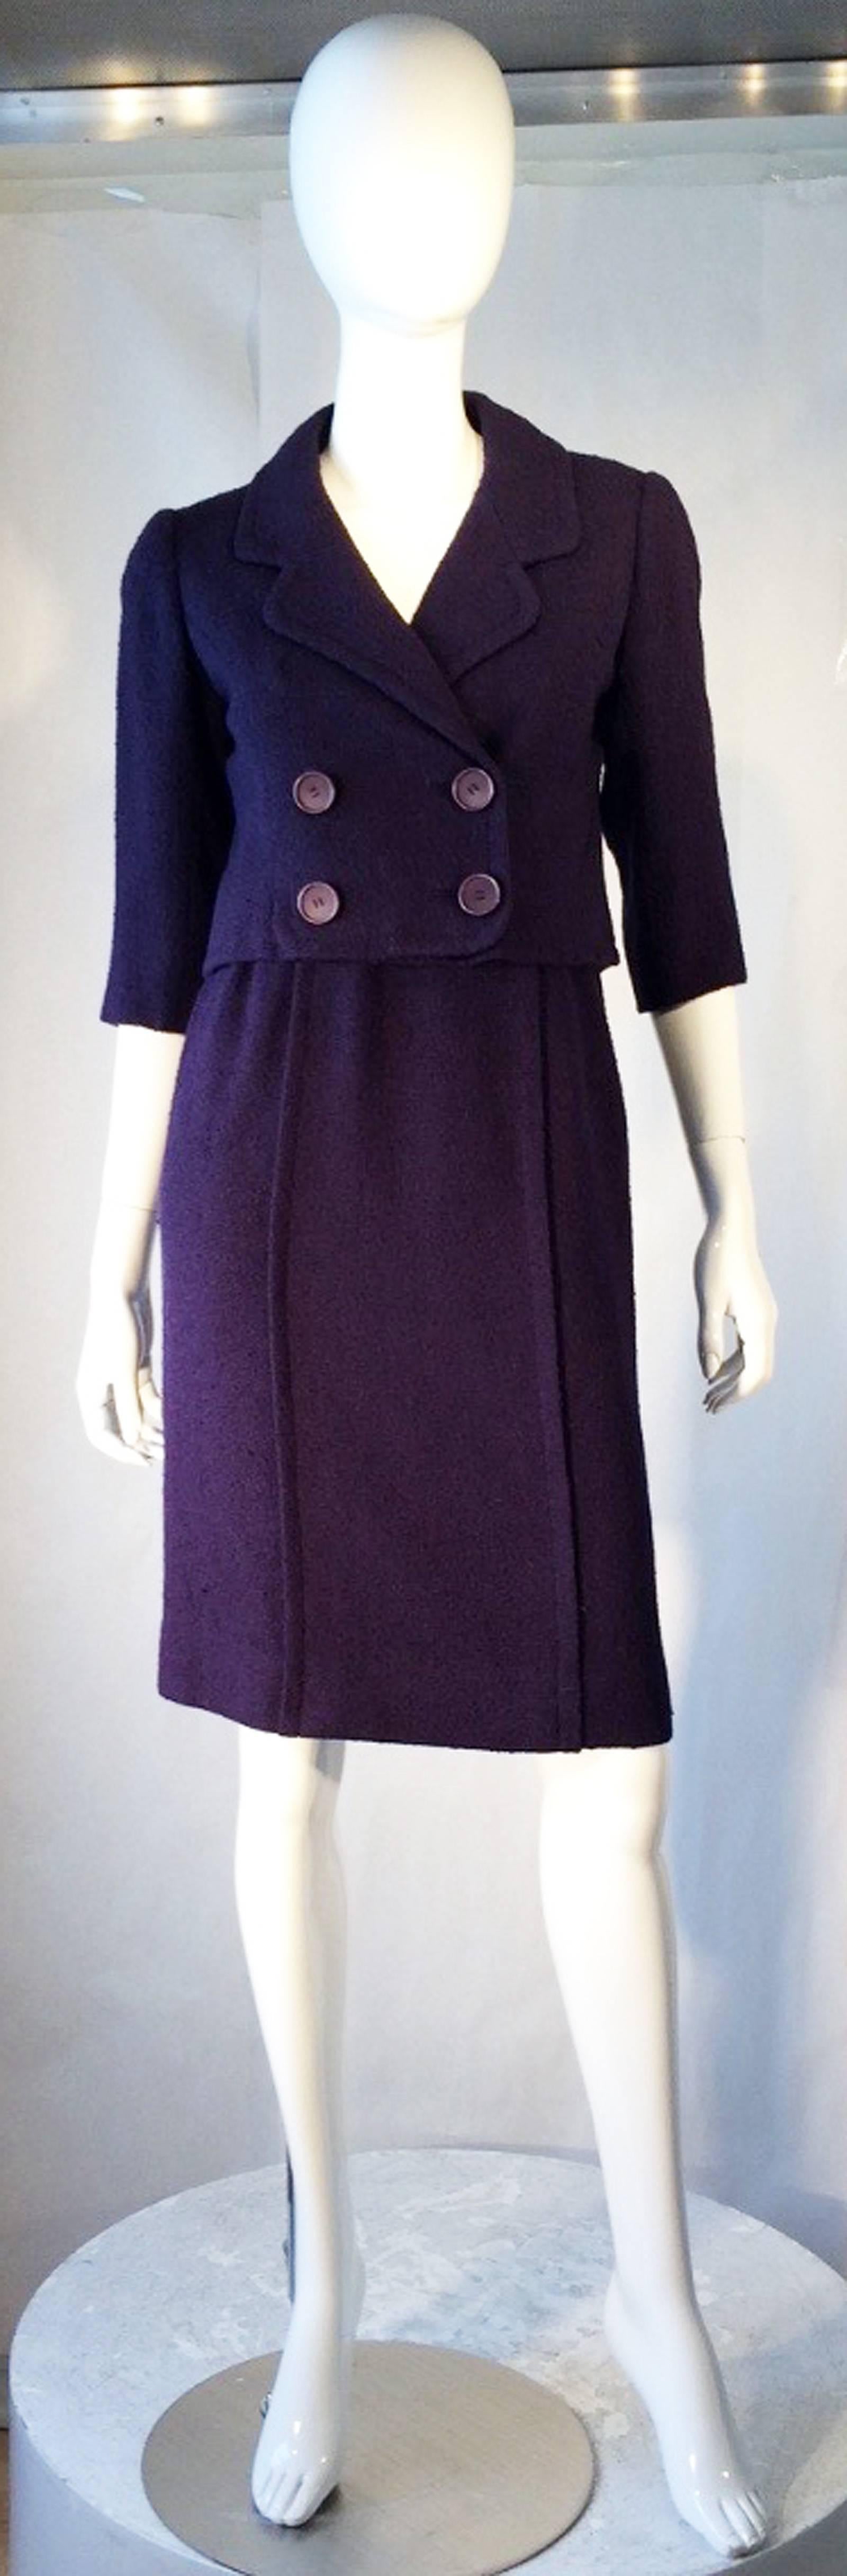 A fine and rare vintage Balenciaga haute couture skirt suit. Authentic numbered item circa 1957. Unusual dark lilac 2pc. wool frise fabric items feature precision seams with original buttons, zippers, hooks etc. Excellent and rare item with no